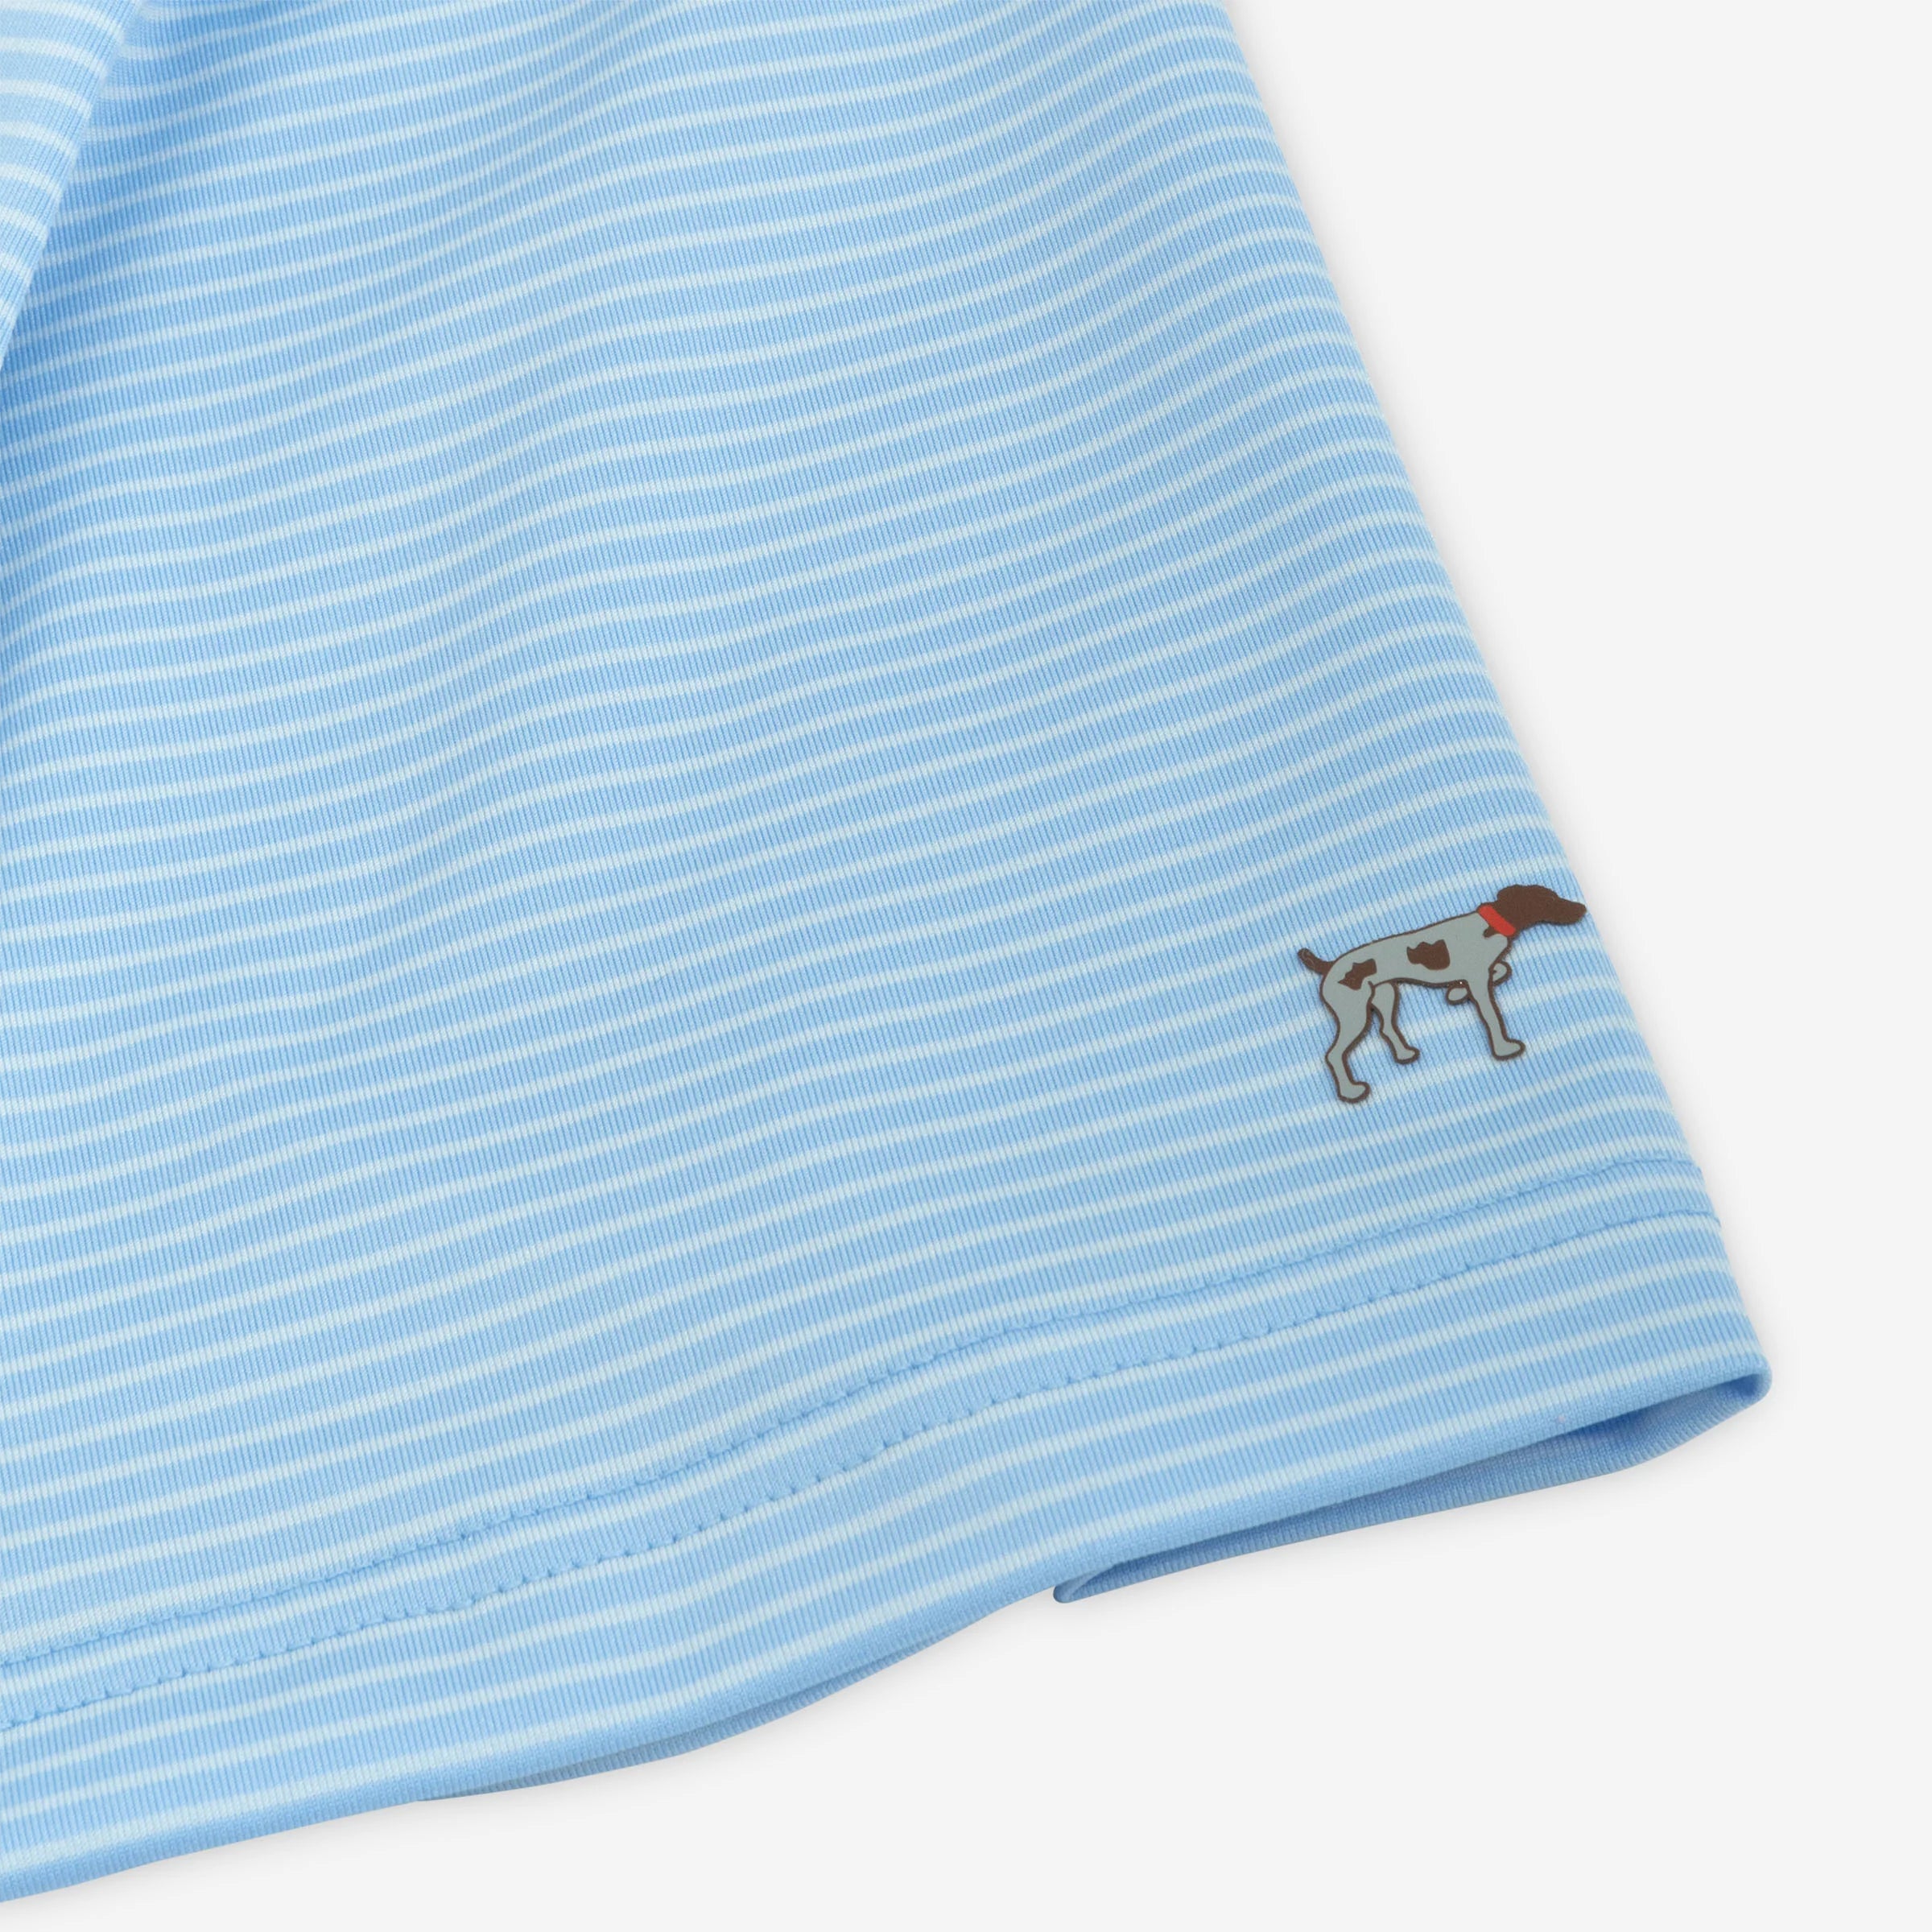 Dune Stripe YOUTH Polo in Powder Blue by Southern Point Co.